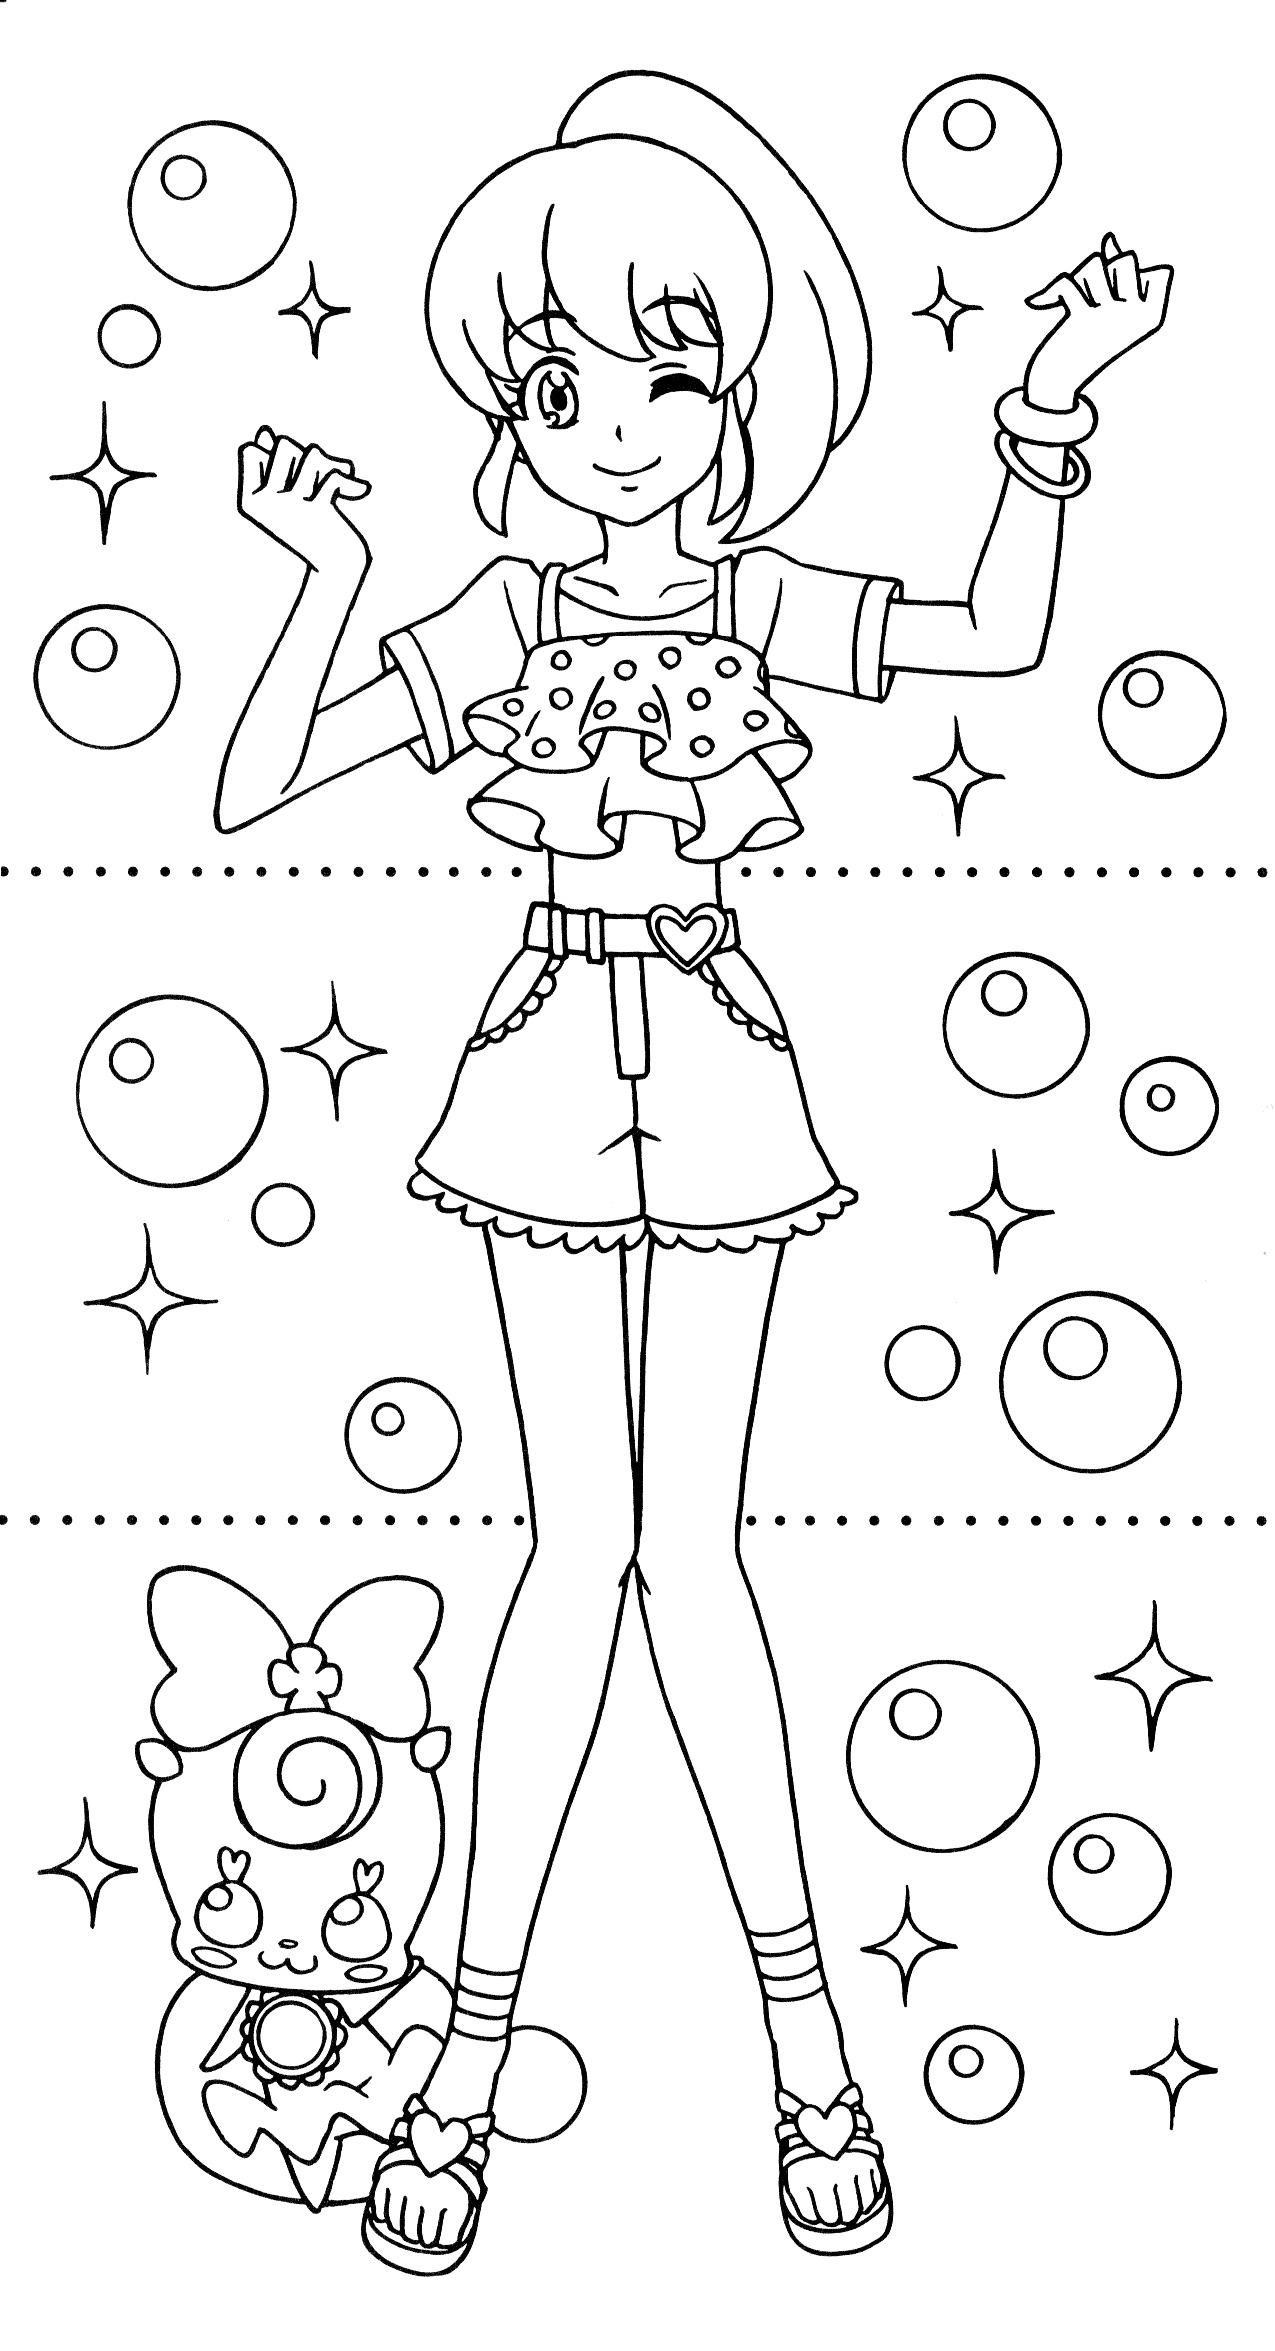 Happiness Charge Precure Dressup Coloring Book 6